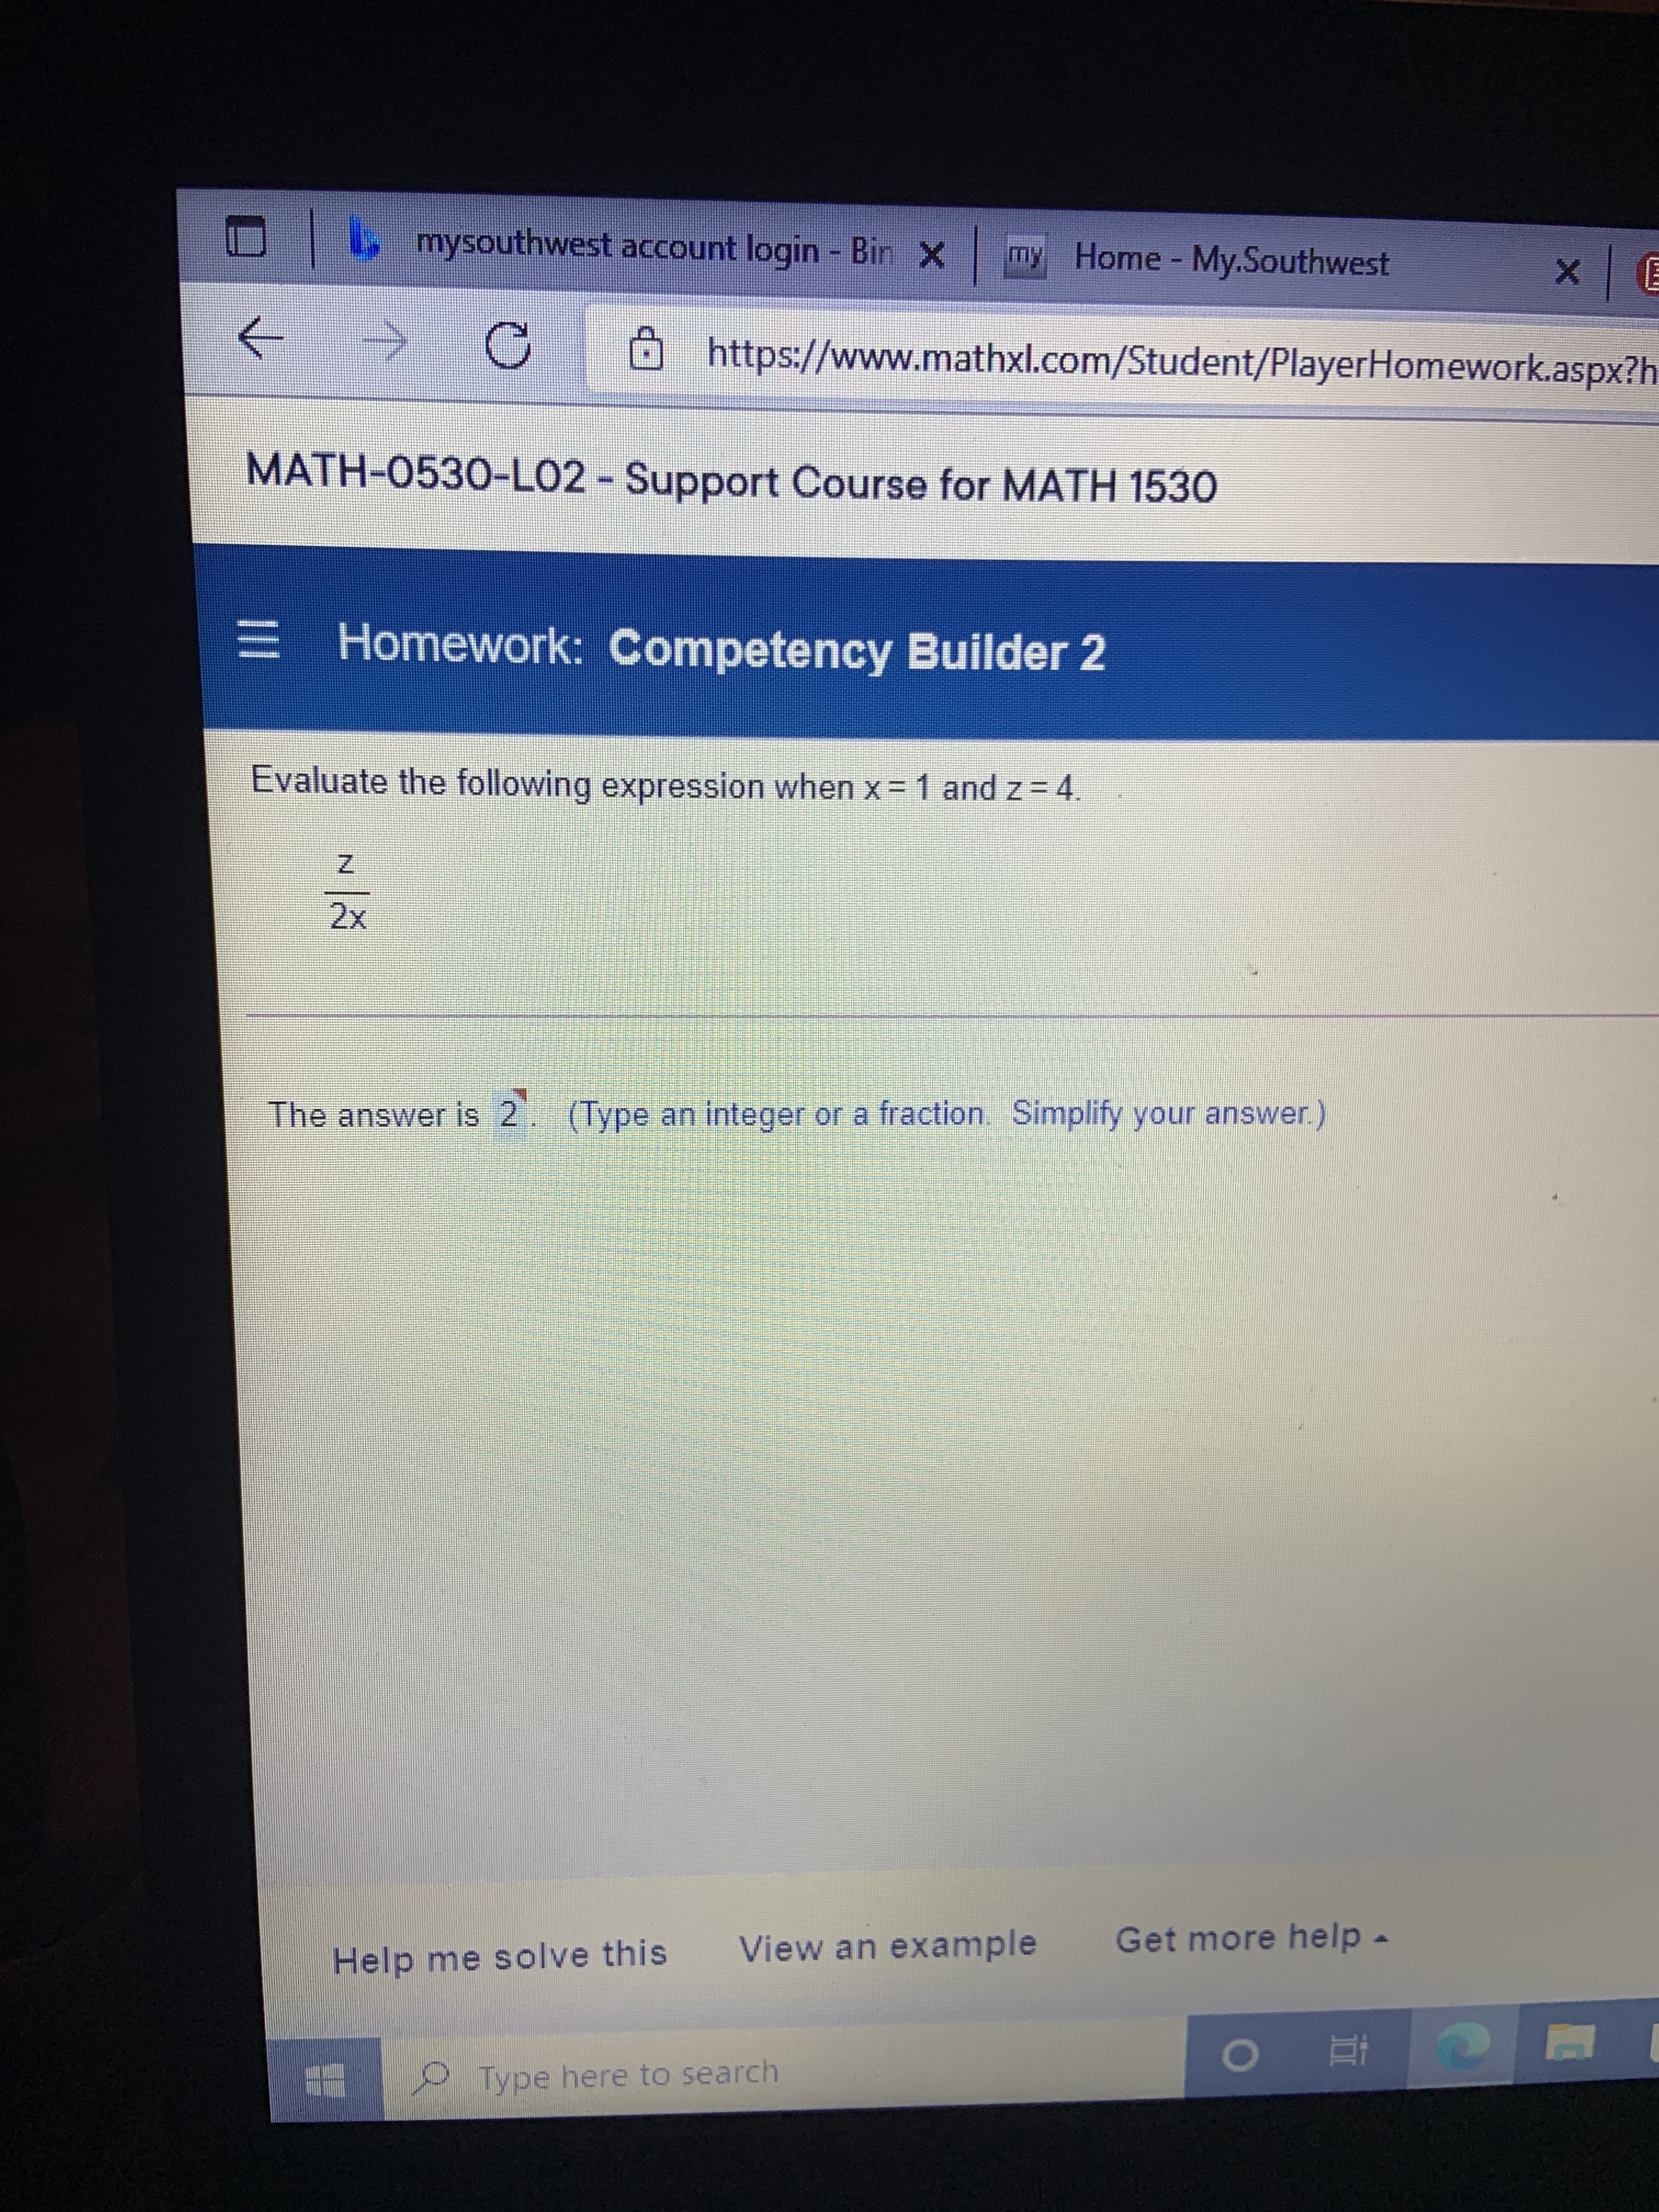 mysouthwest account login - Bin X
my Home My.Southwest
目| x
https://www.mathxl.com/Student/PlayerHomework.aspx?h
->
MATH-0530-LO2 - Support Course for MATH 1530
= Homework: Competency Builder 2
Evaluate the following expression when x = 1 and z = 4.
The answer is 2 (Type an integer or a fraction Simplify your answer.)
View an example
Get more help -
Help me solve this
0 Type here to search
直。
